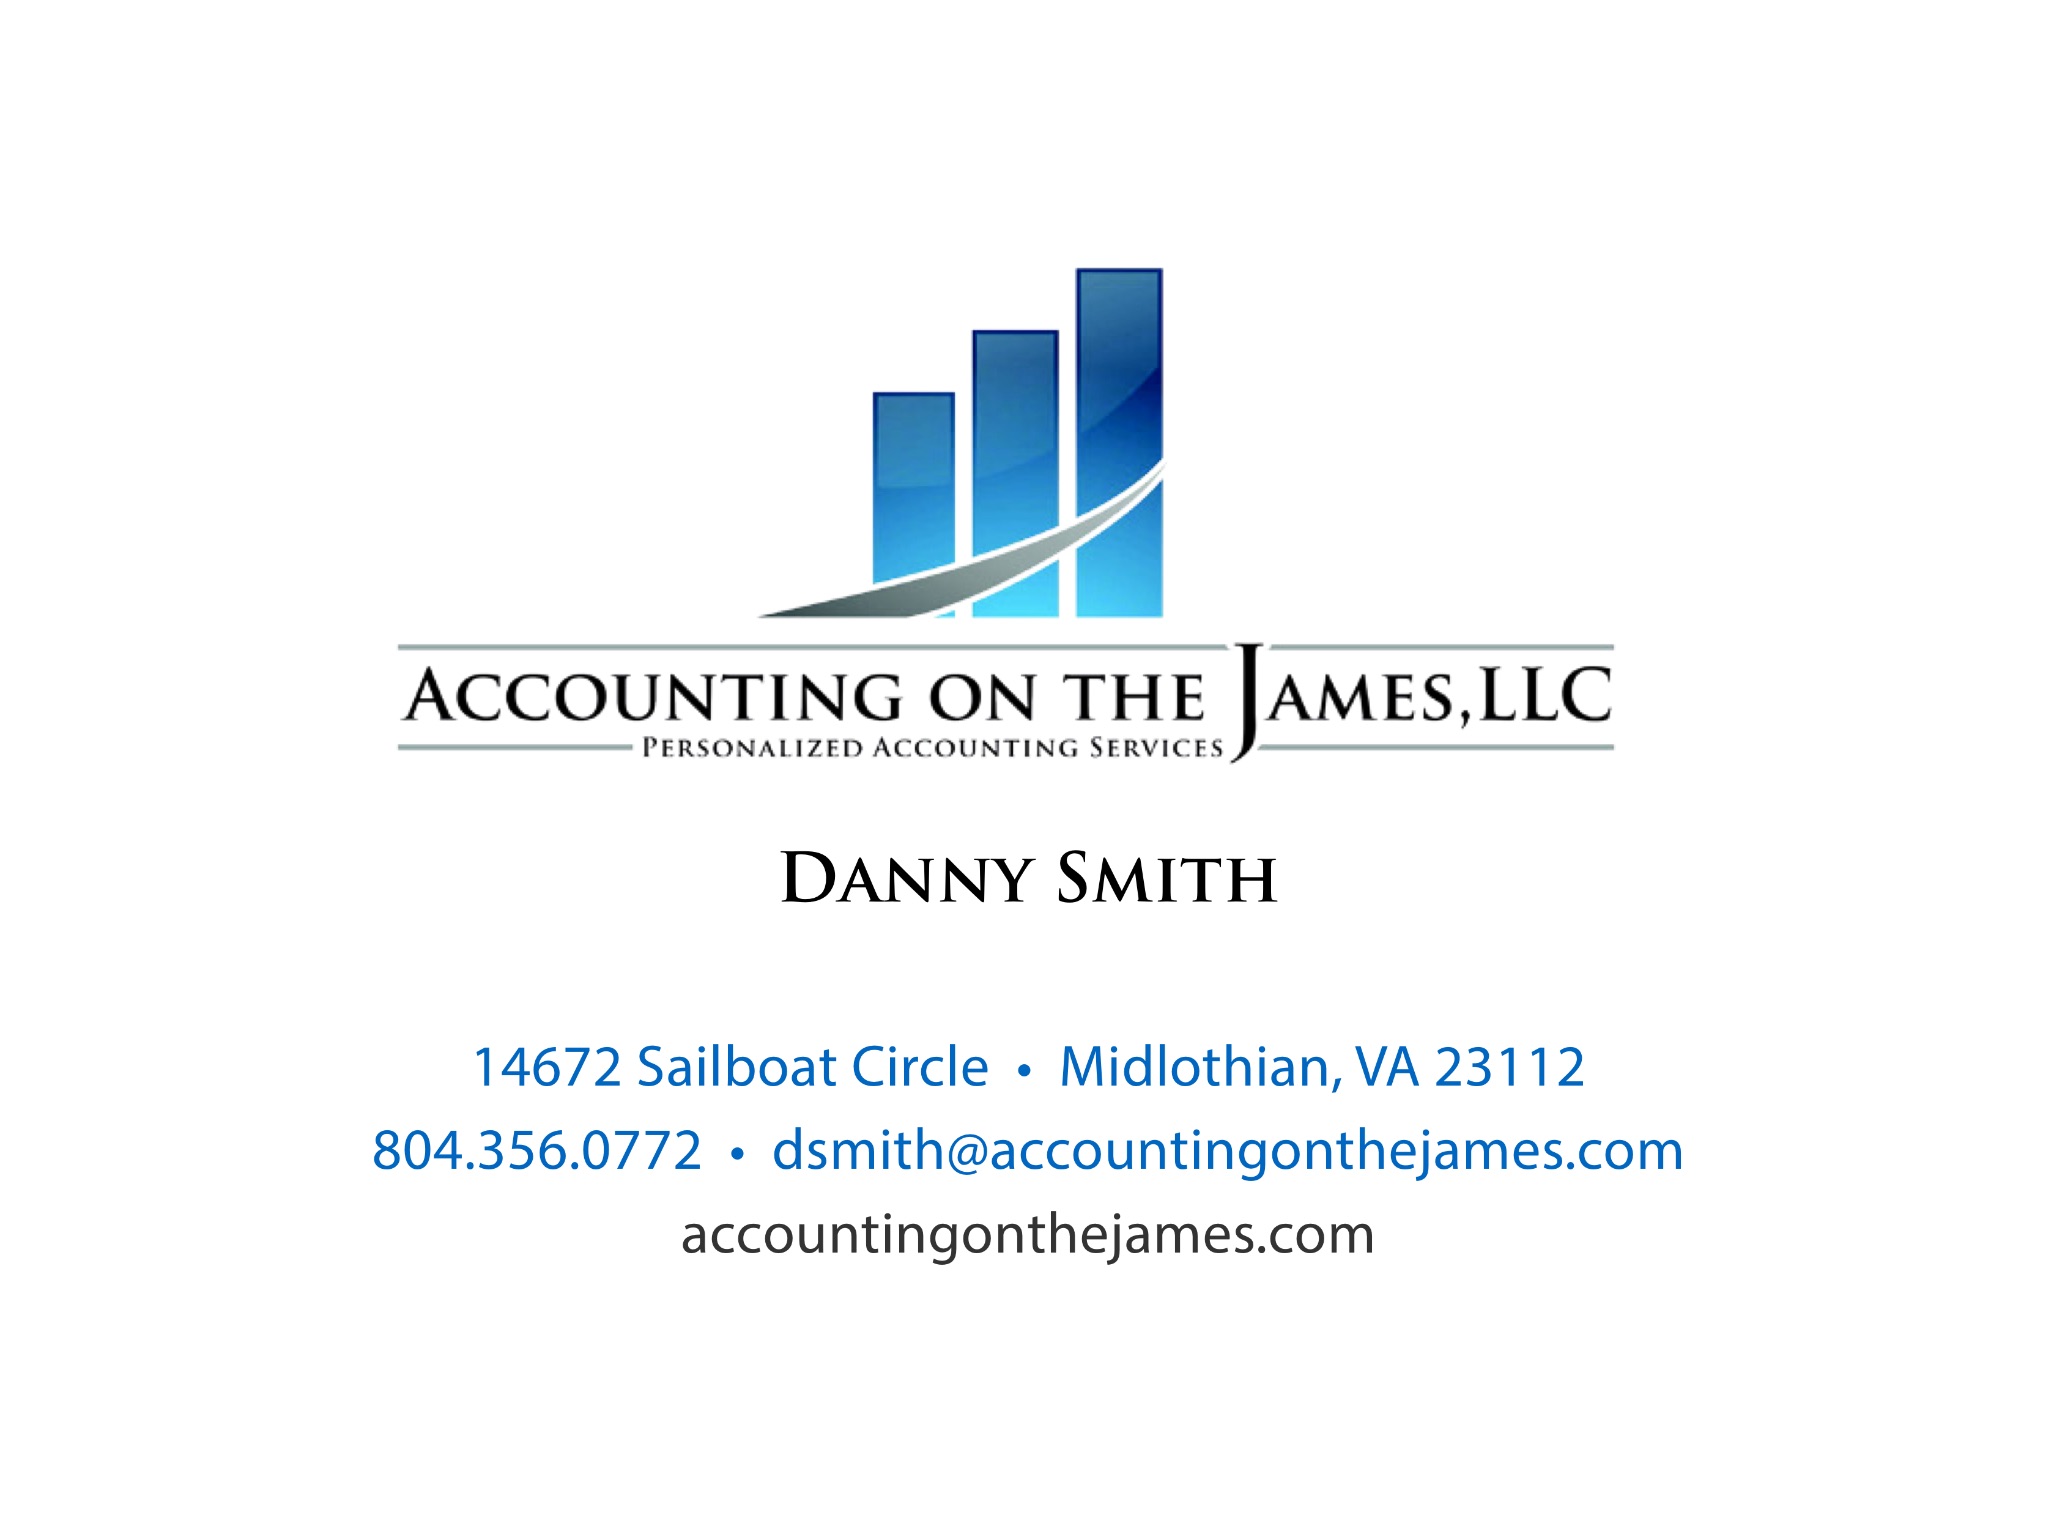 Accounting On The James, LLC